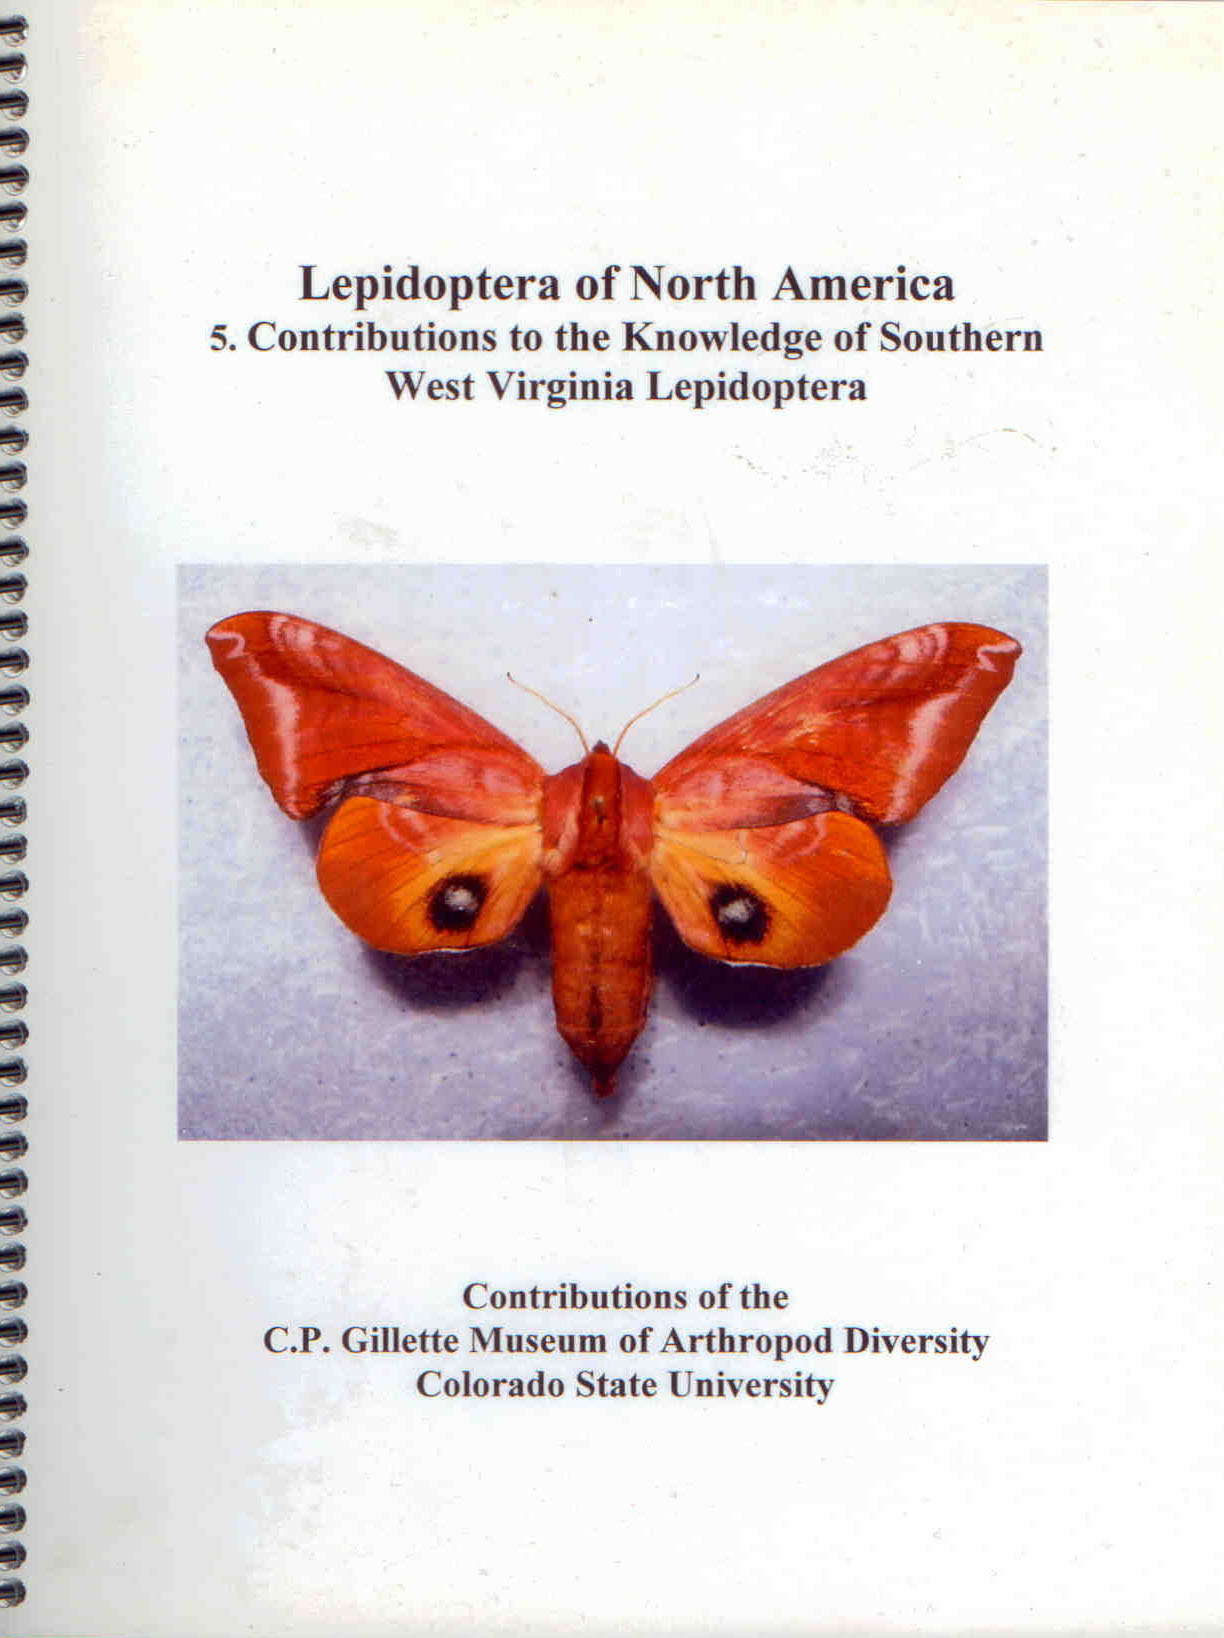 Albu, V.; Metzler, E. - Lepidoptera of North America 5. Contributions to the knowledge of southern West Virginia Lepidoptera